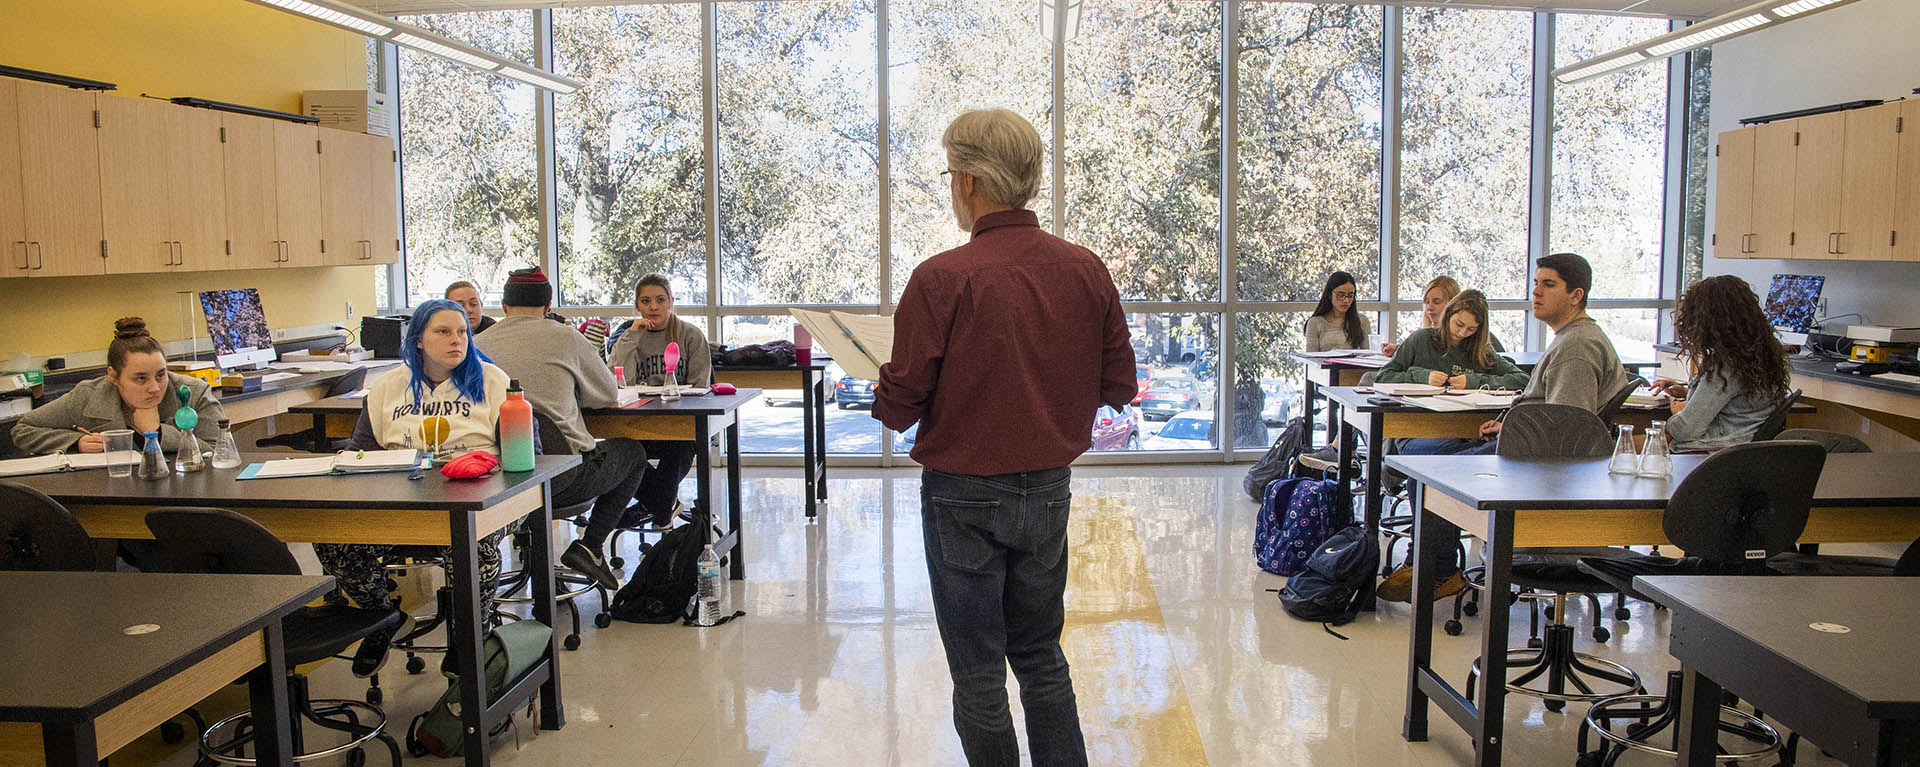 The profile of a professor is seen in front of tables of students focused on what they're teaching.